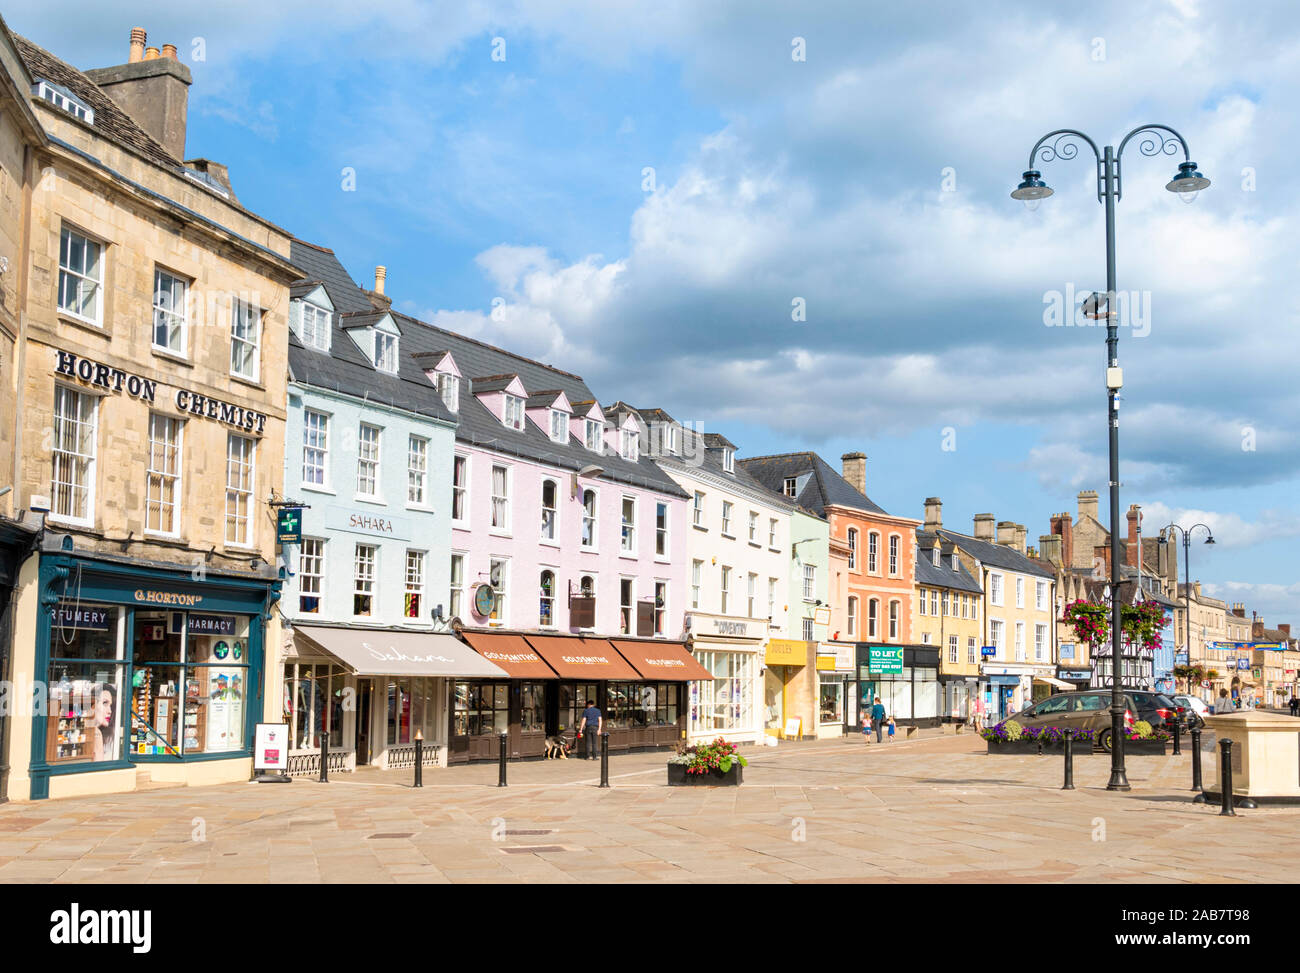 Shops and businesses on the Market Place, Cirencester town centre, Cirencester, Wiltshire, England, United Kingdom, Europe Stock Photo